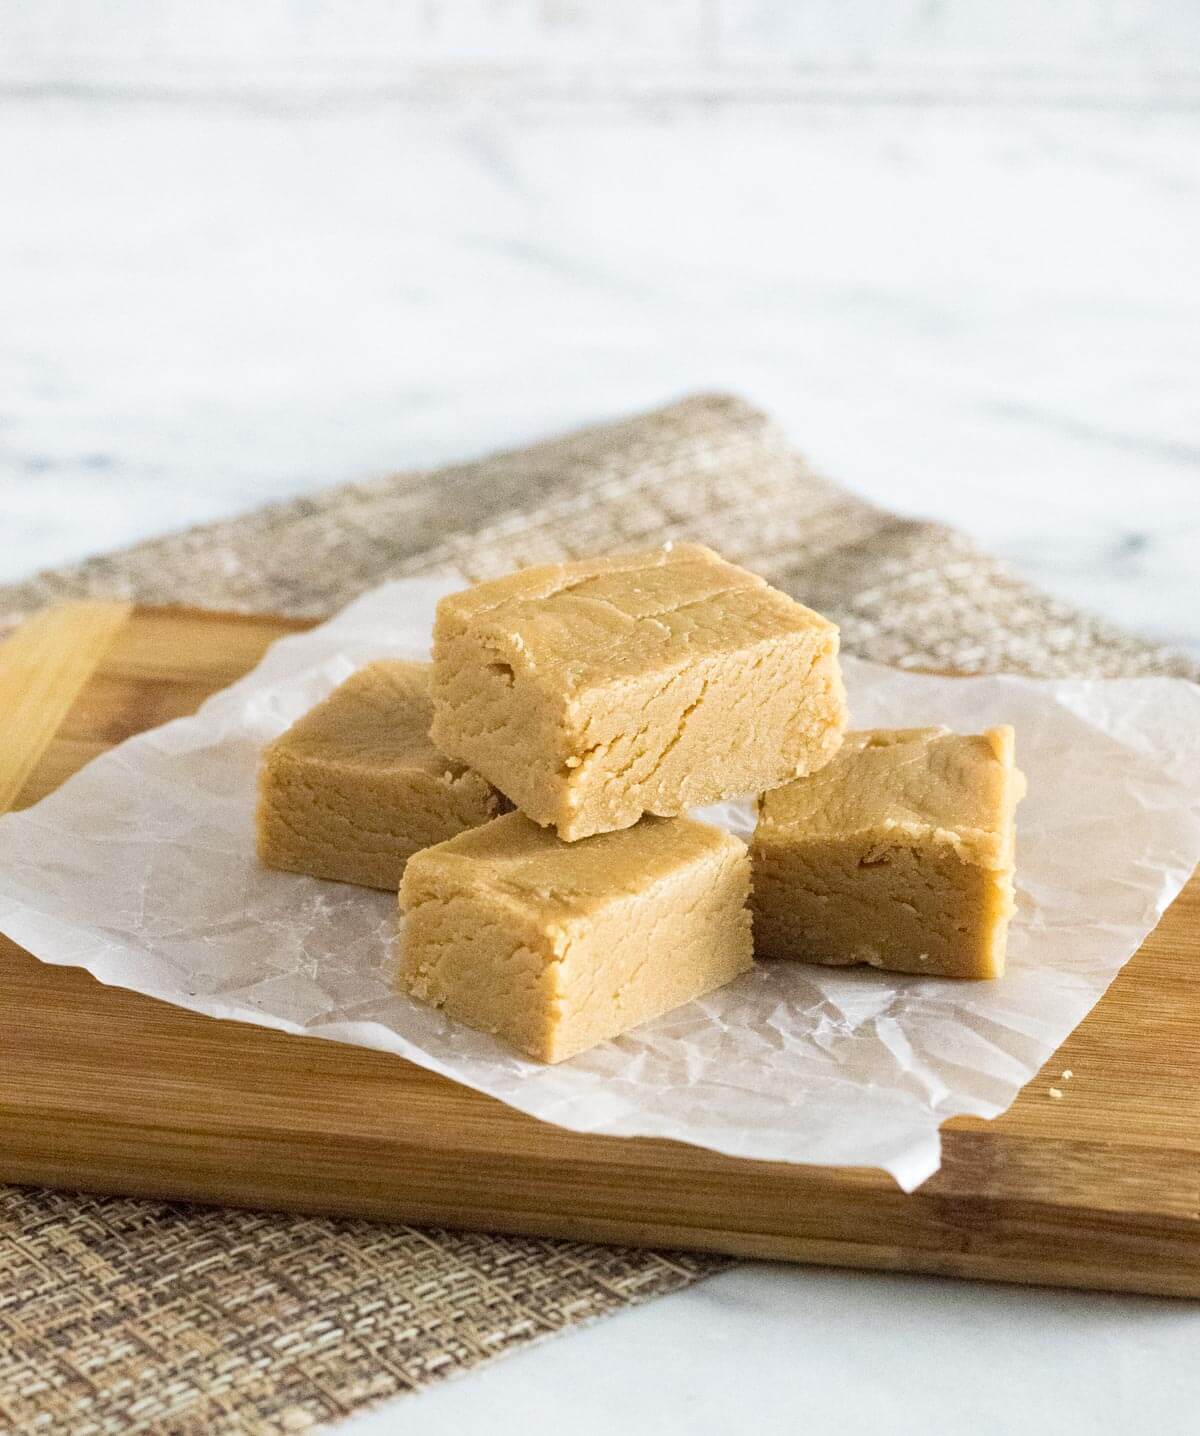 Old fashioned peanut butter fudge on wax paper.